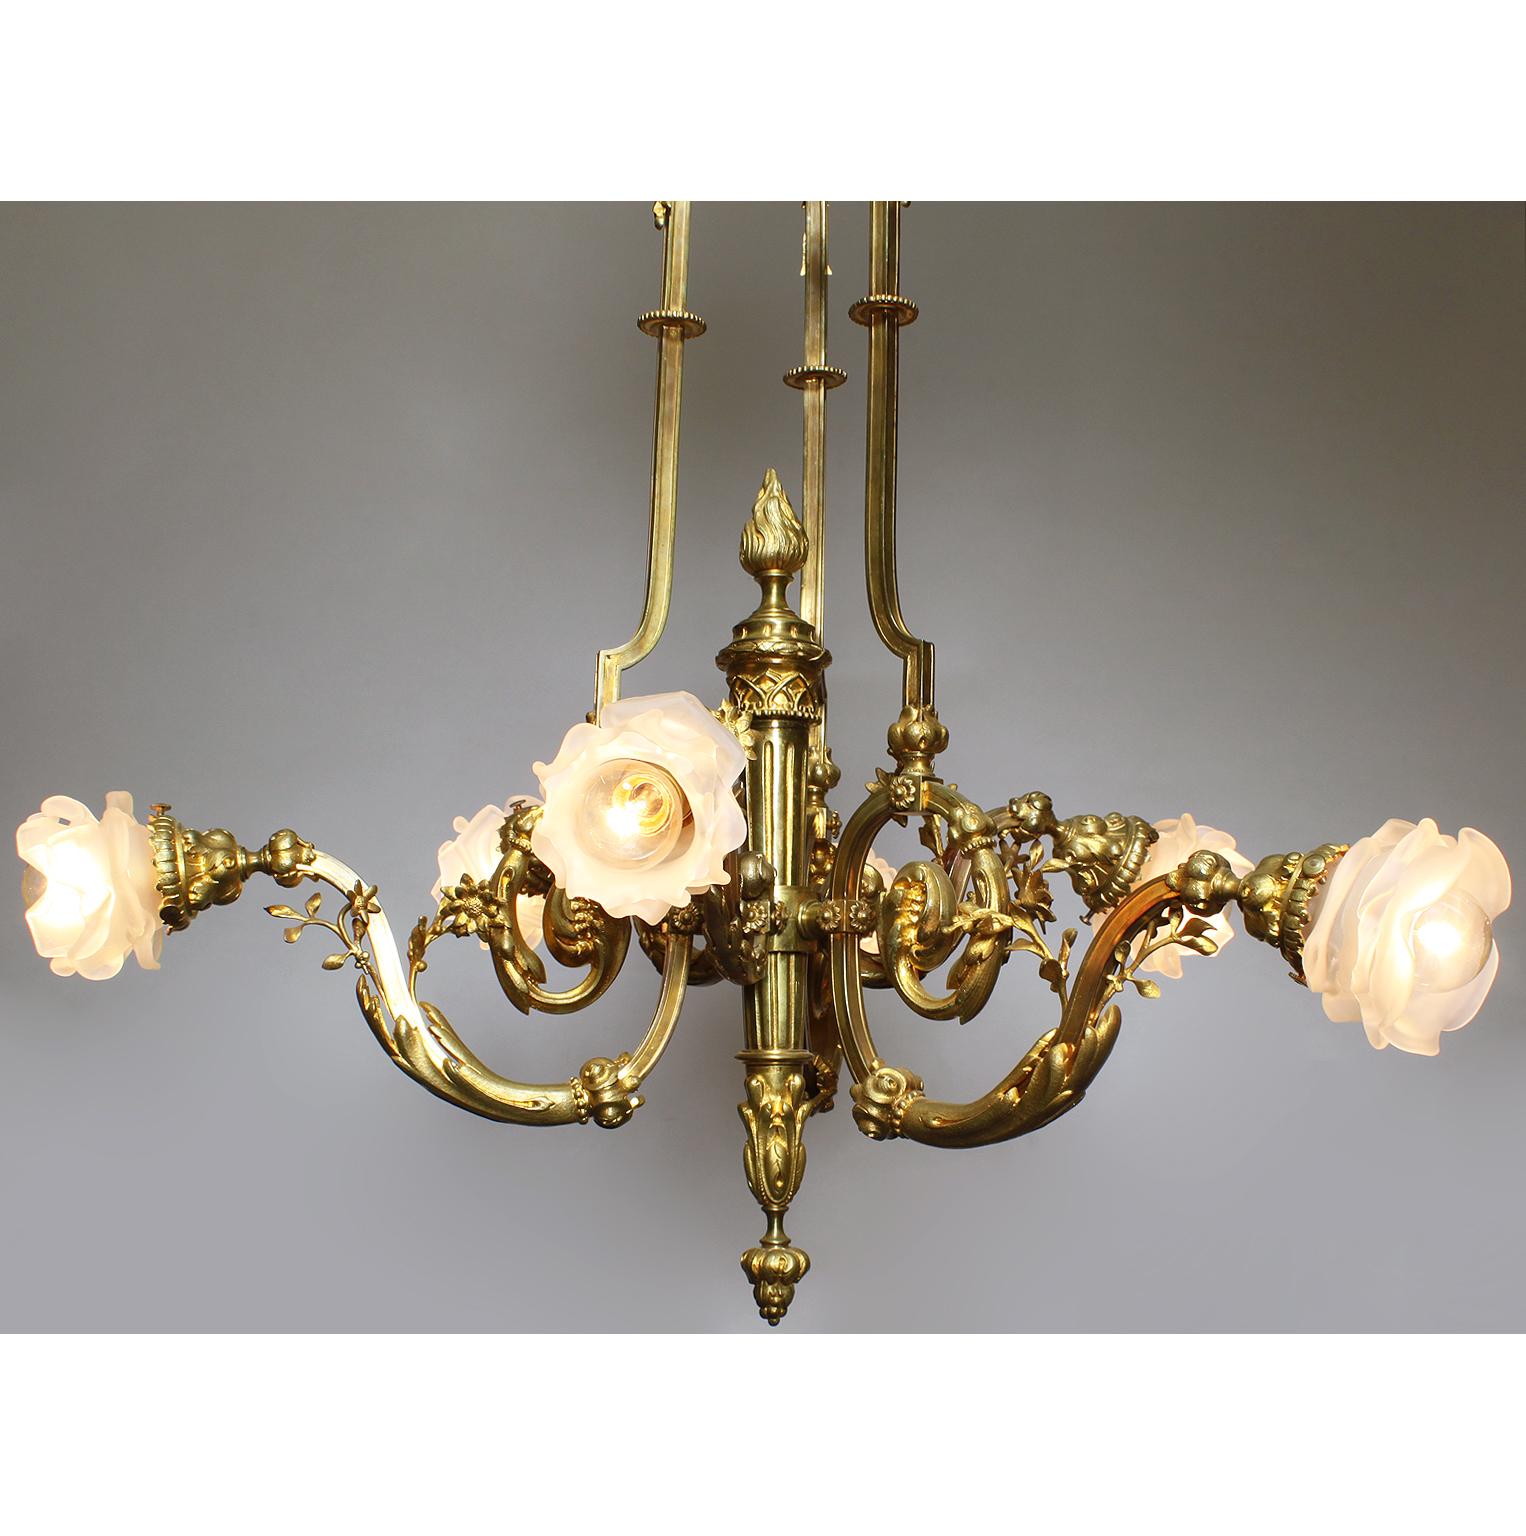 A fine French Louis XV style Belle Époque gilt bronze six-light chandelier. The Empire Revival gilt-bronze frame with a torch-shaped center stem with six scrolled arms fitted with frosted glass floral shaded, all crowned with a domed top surmounted